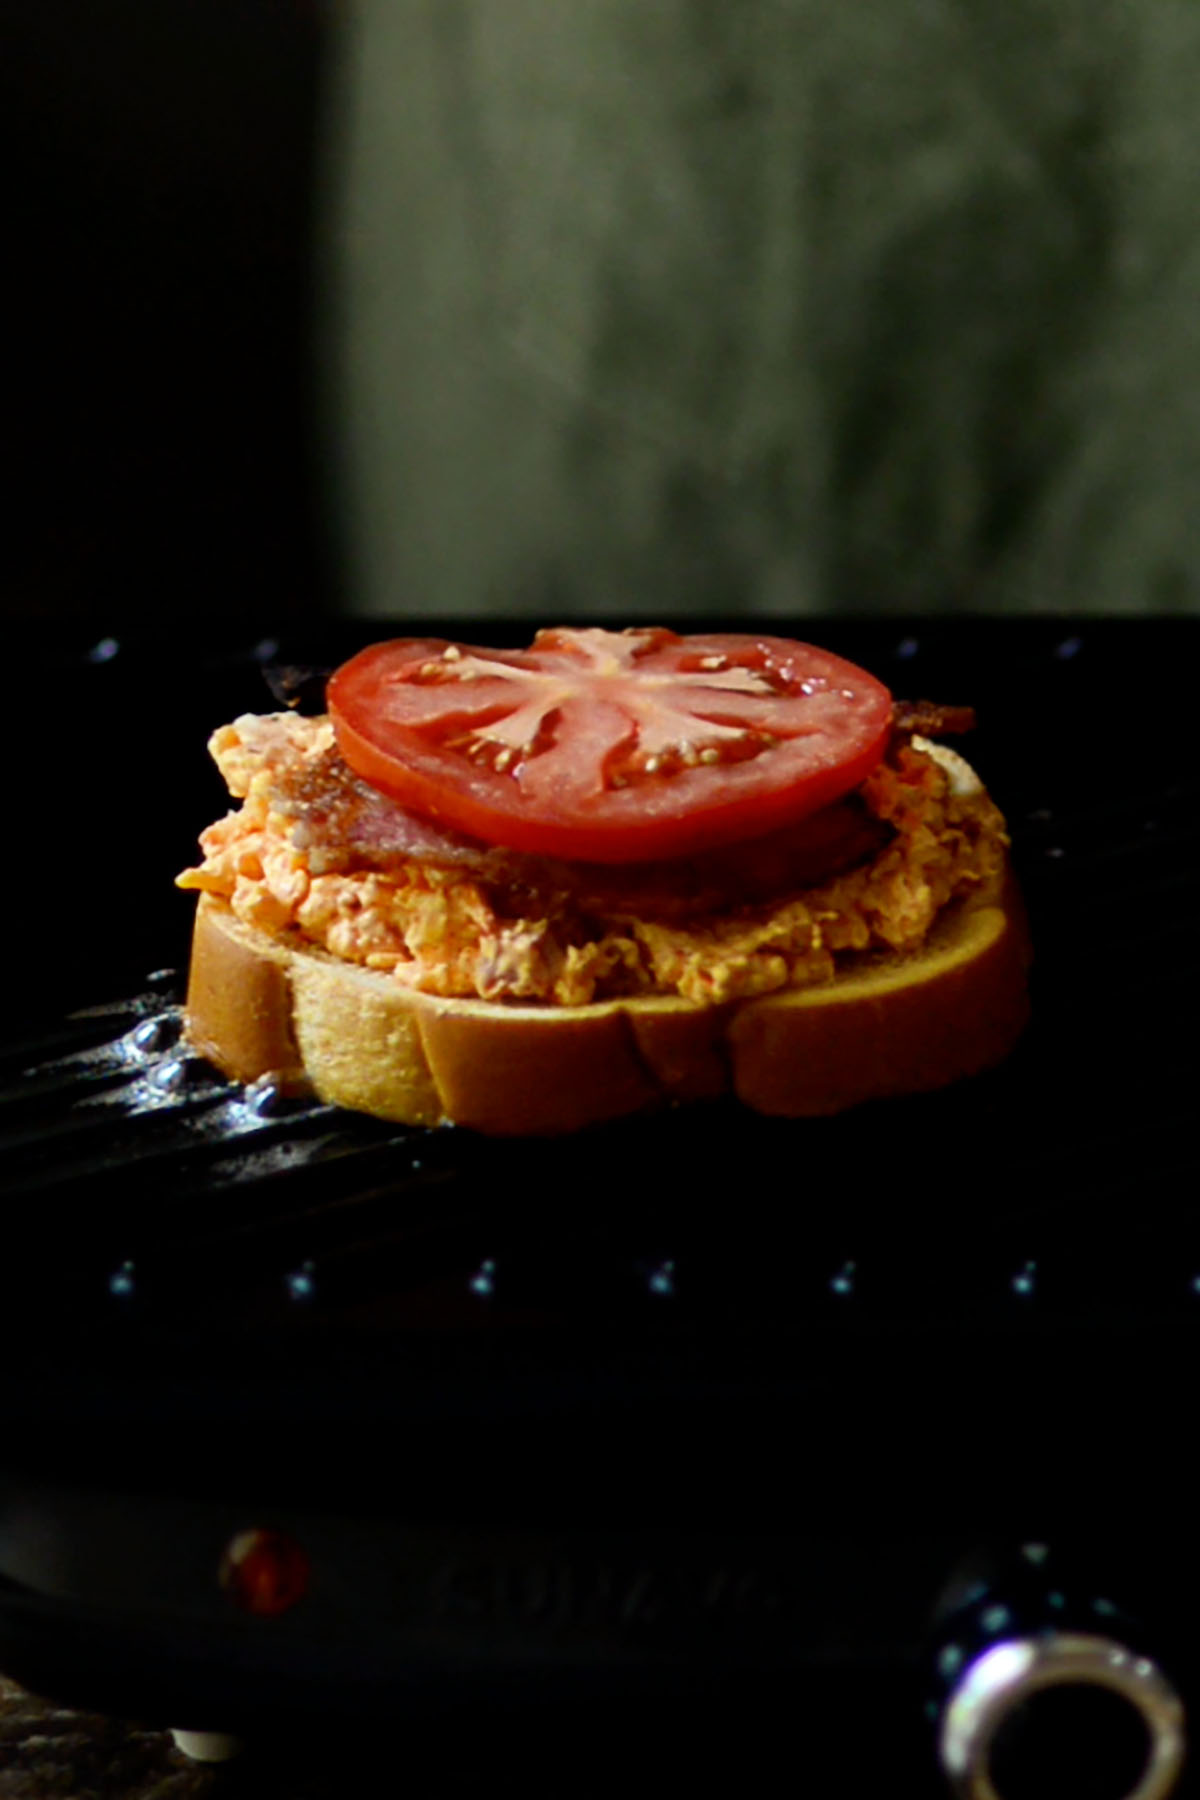 Pimento cheese spread over one slice of Texas toast on a cast iron griddle and topped with a slice of cooked bacon and a tomato slice.